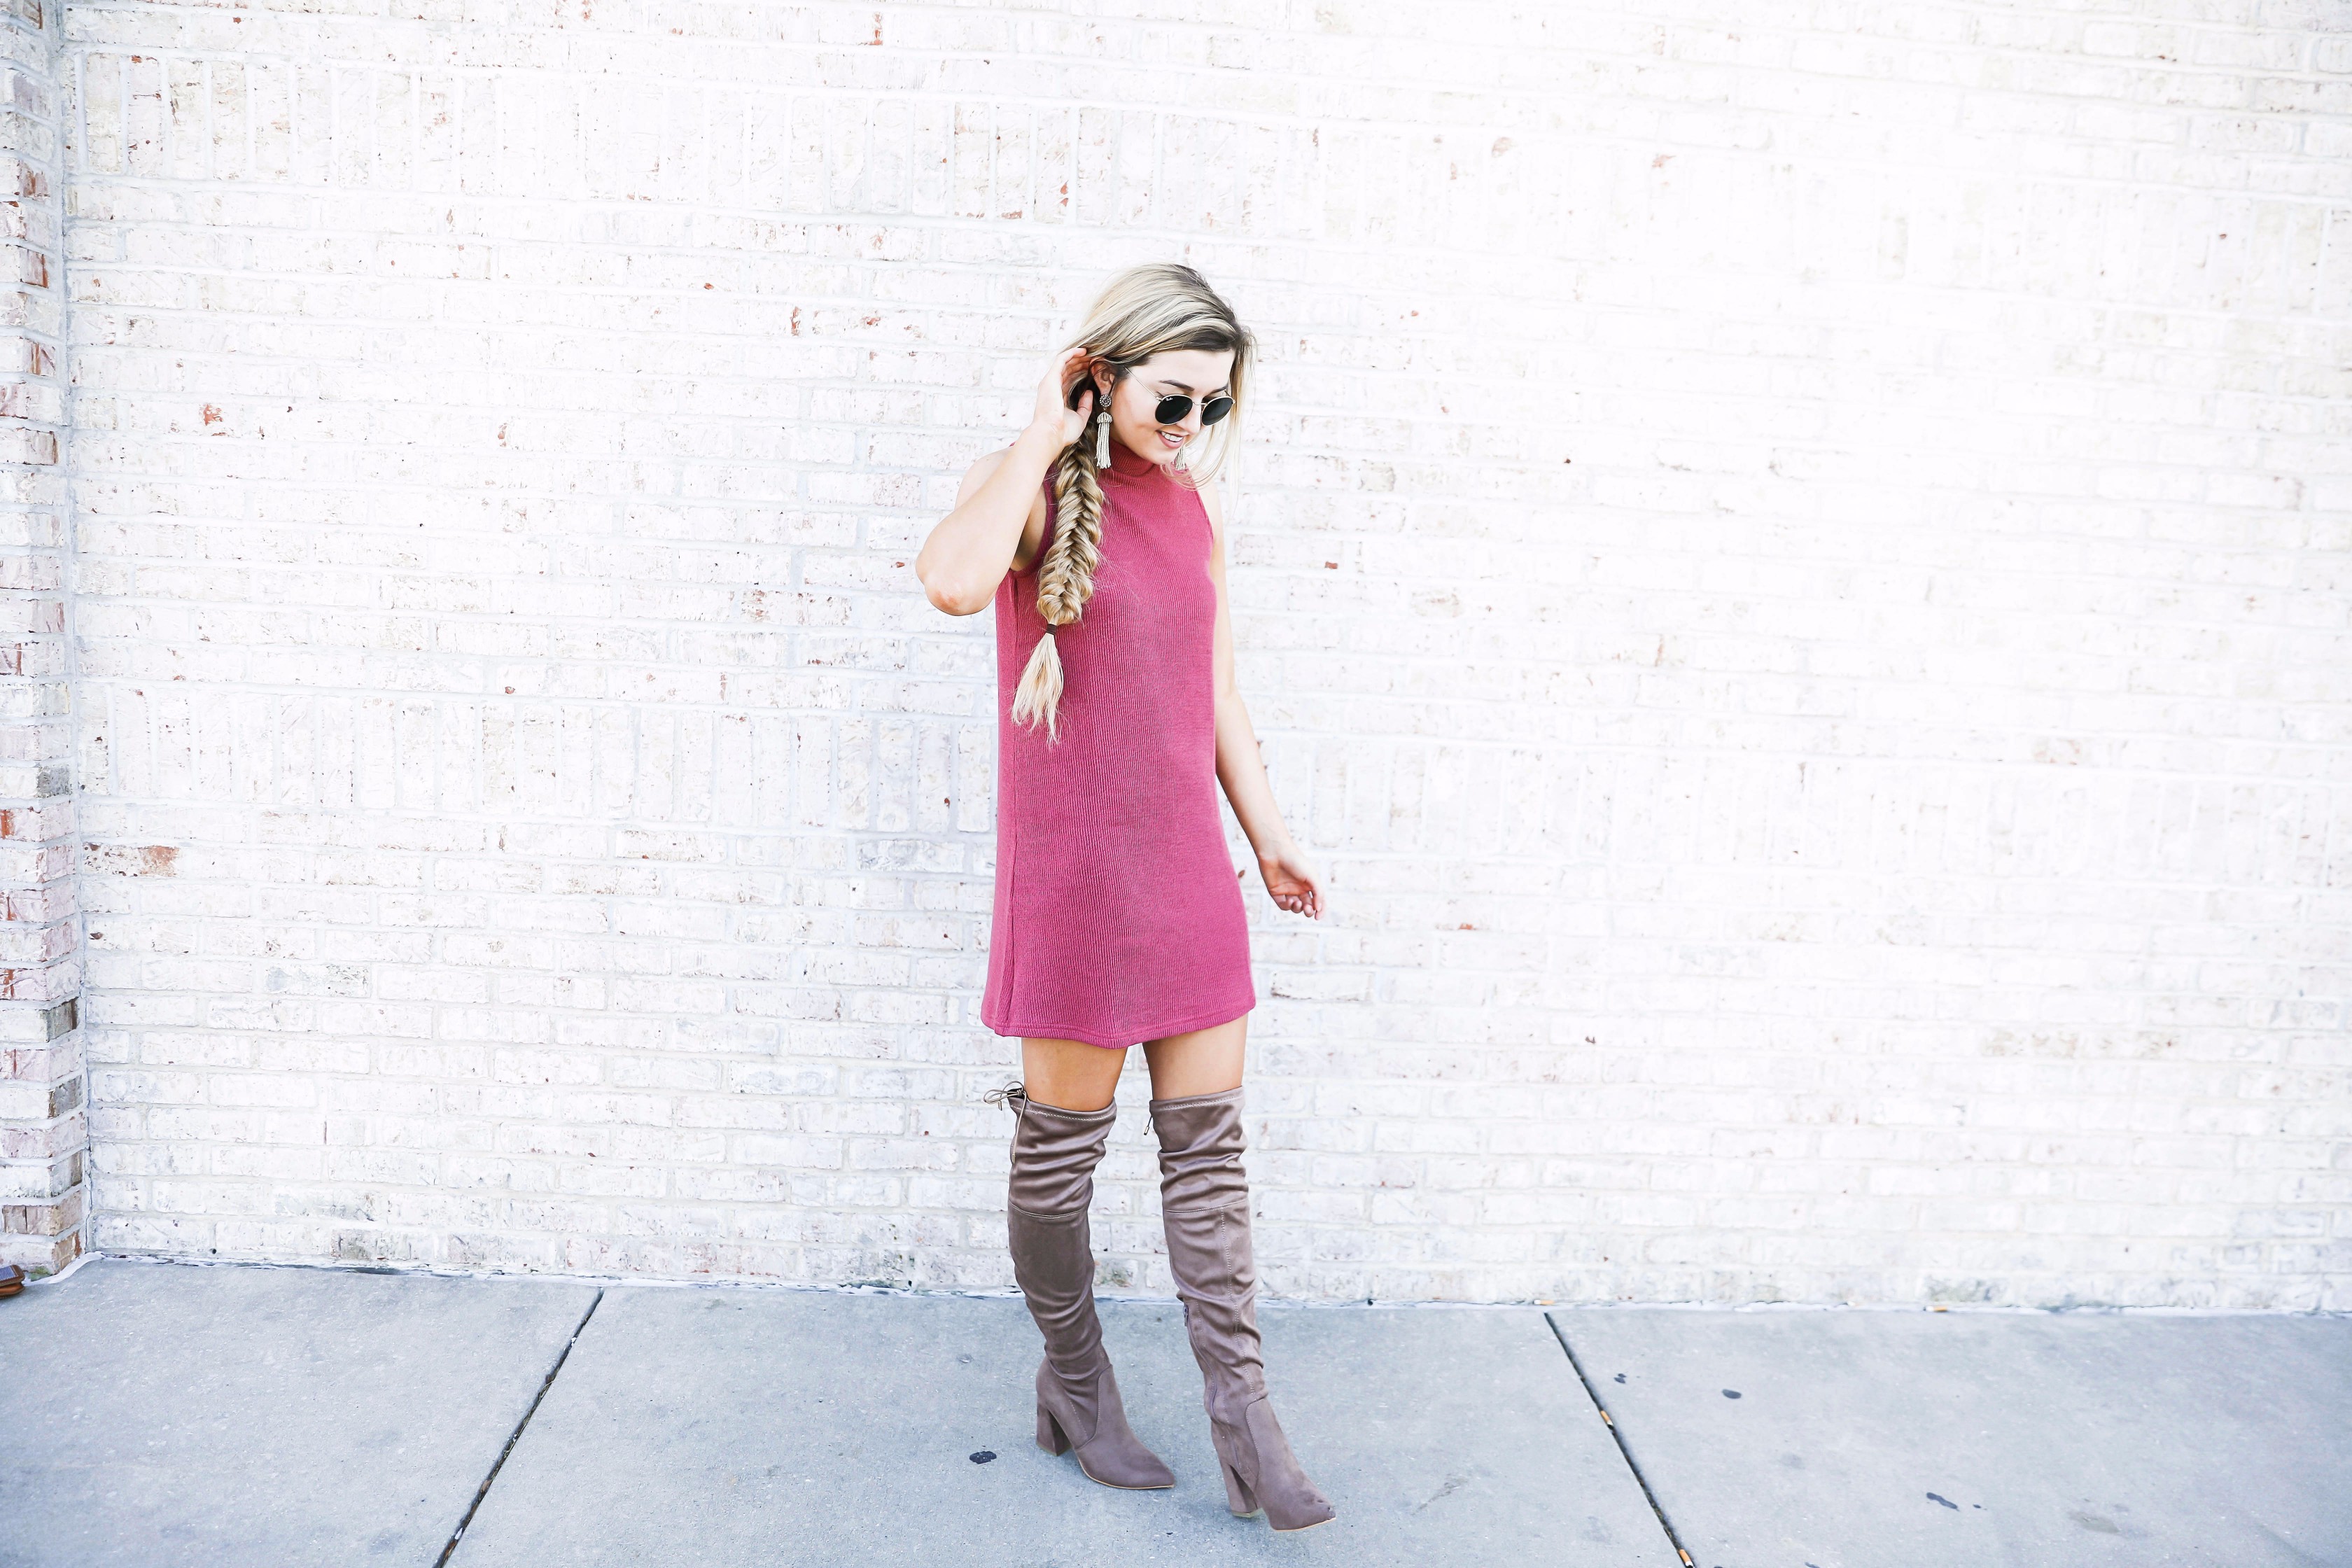 Red Dress Boutique sweater dress paired with suede over the knee boots! Cutest fall look on fashion blog daily dose of charm by lauren lindmark